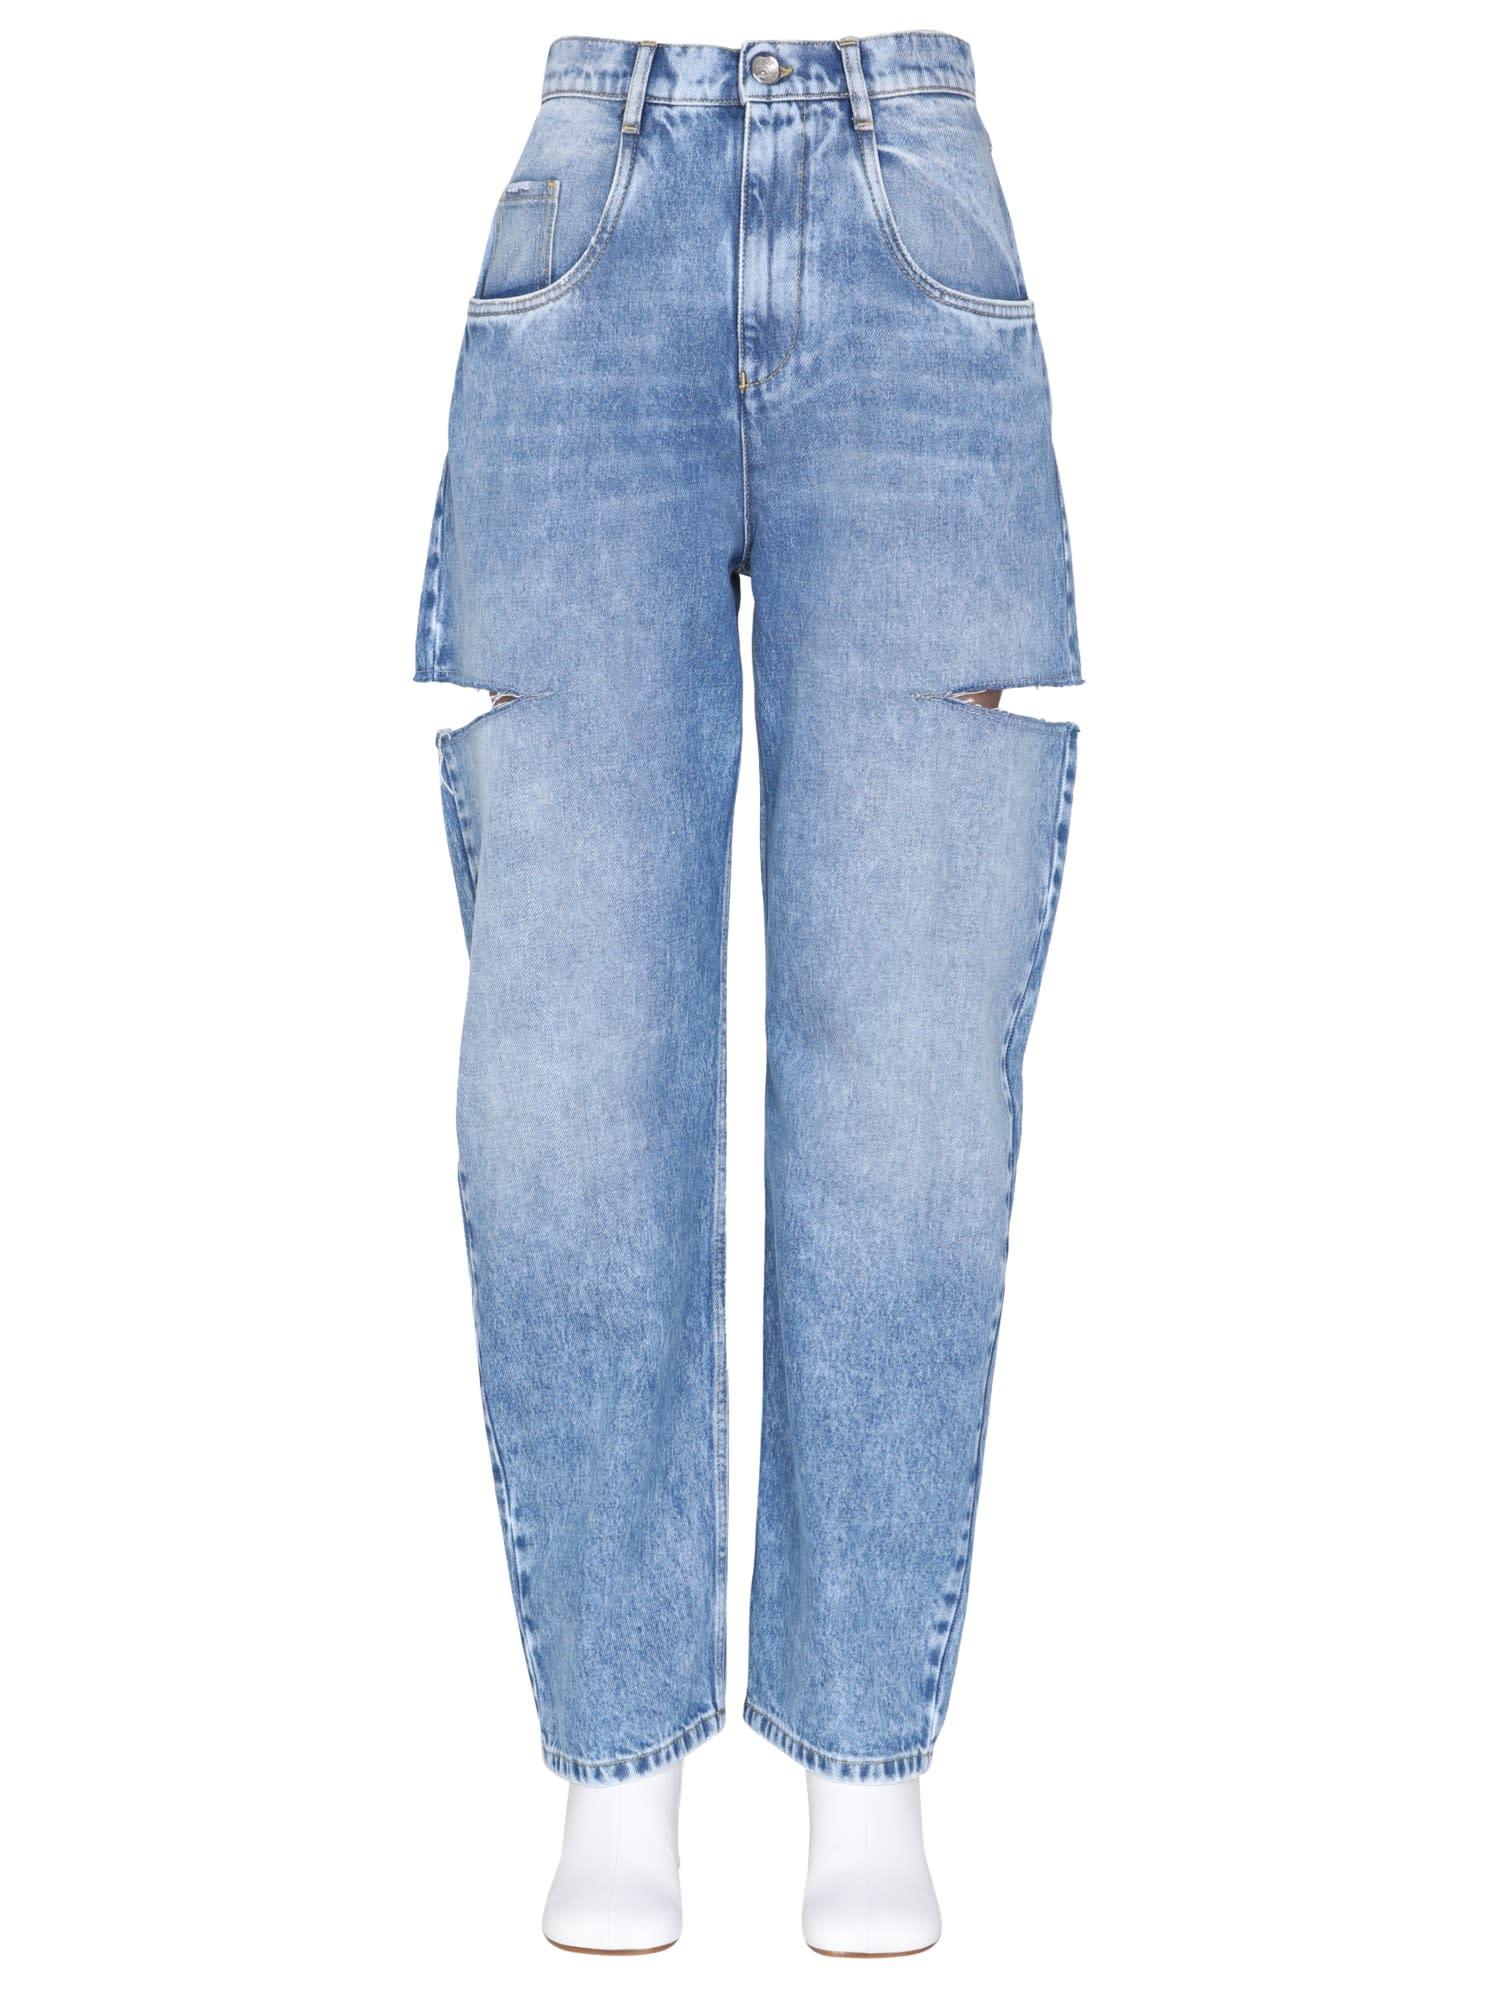 Maison Margiela Jeans With Cut Out Detail in Blue | Lyst